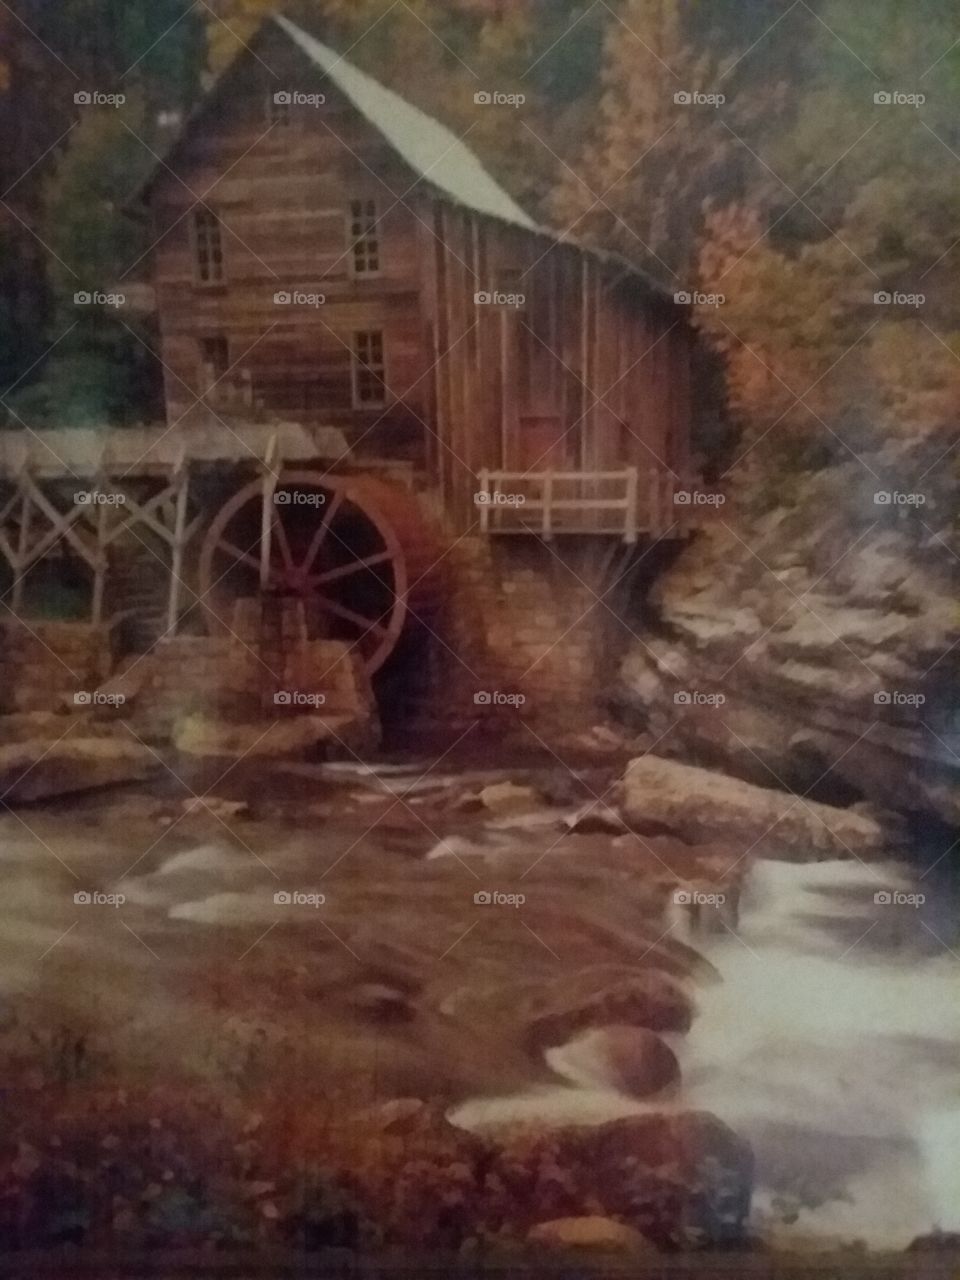 A beautiful old grissmill that was stashed way back in the Mountains of Tennessee.